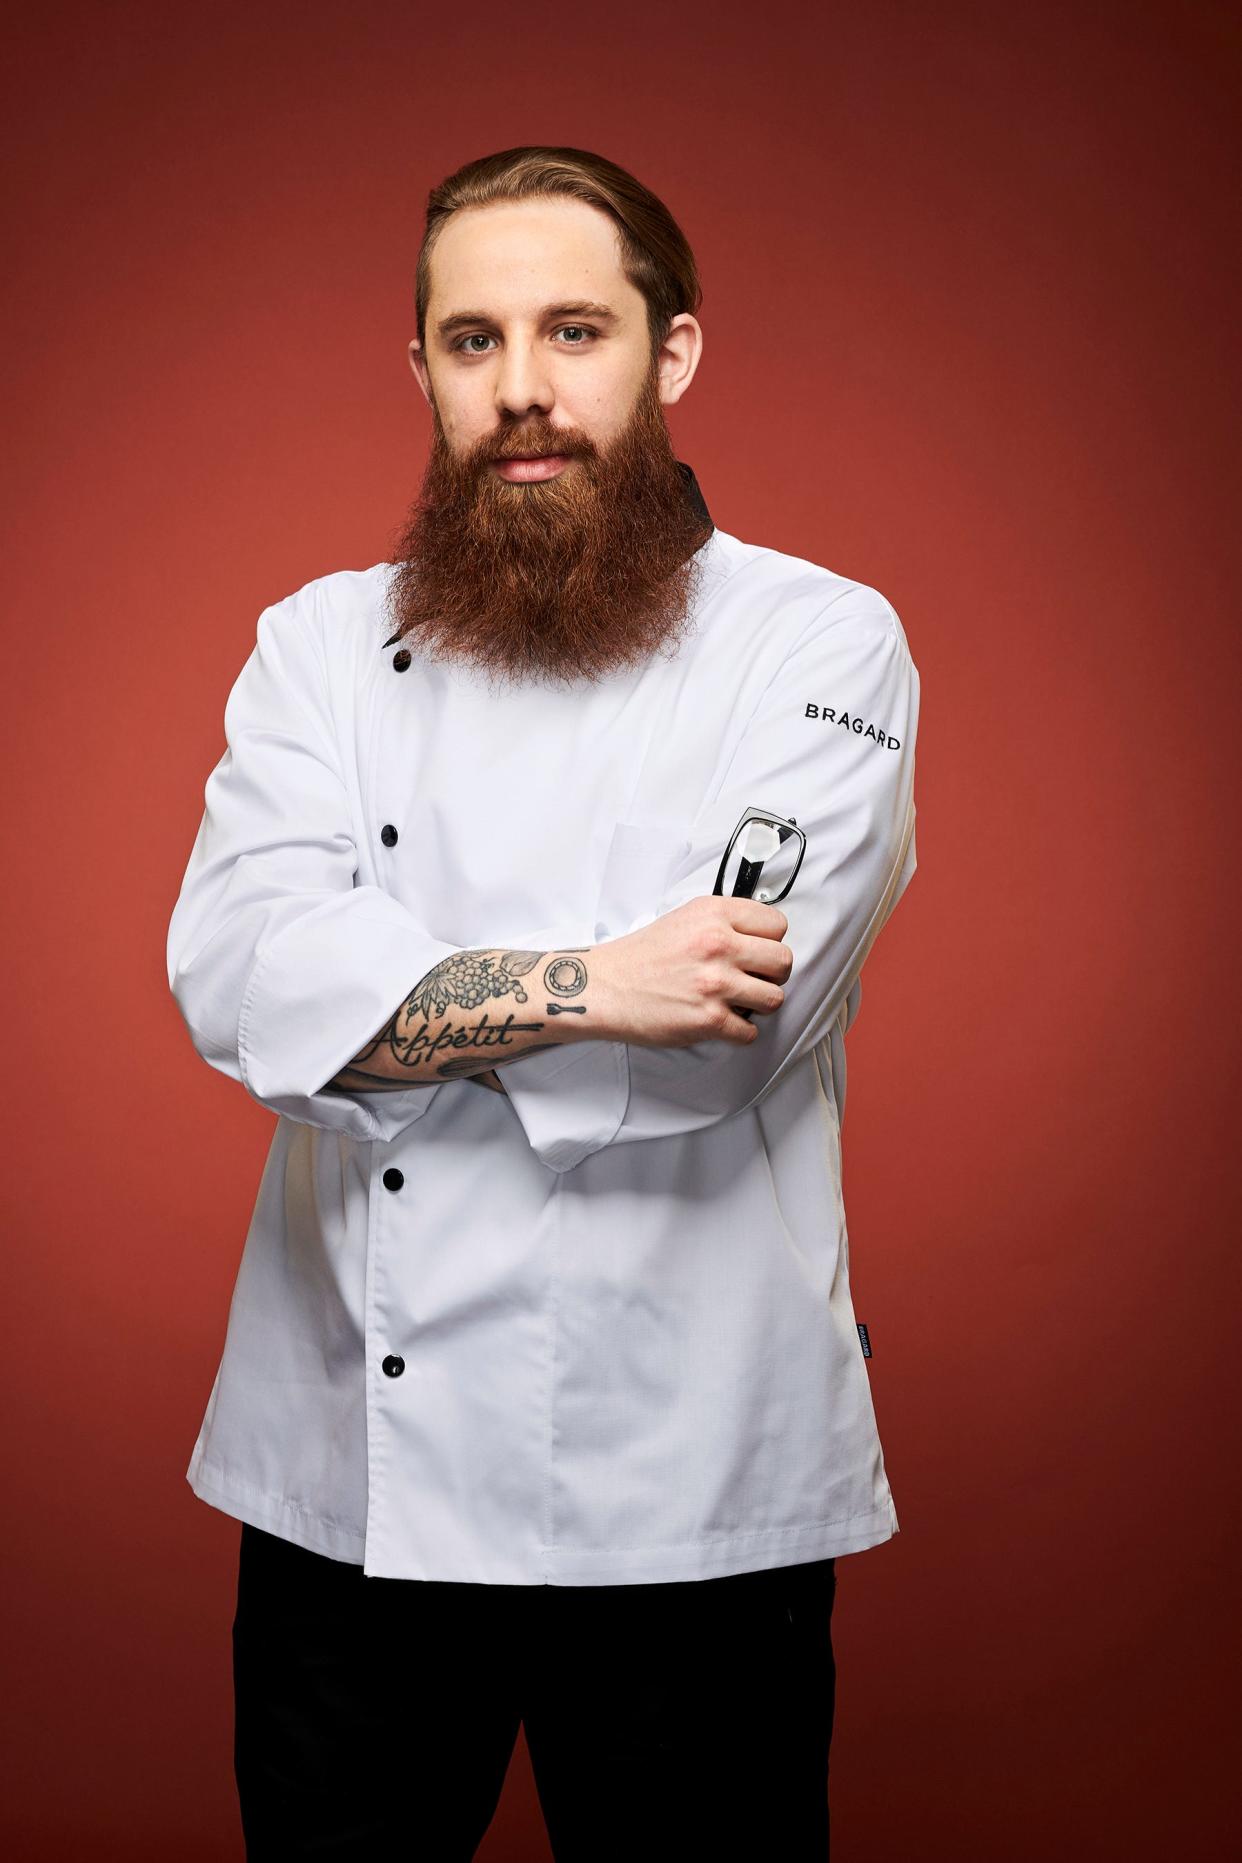 Milwaukee chef competed on a recent episode of "Beat Bobby Flay" on the Food Network.